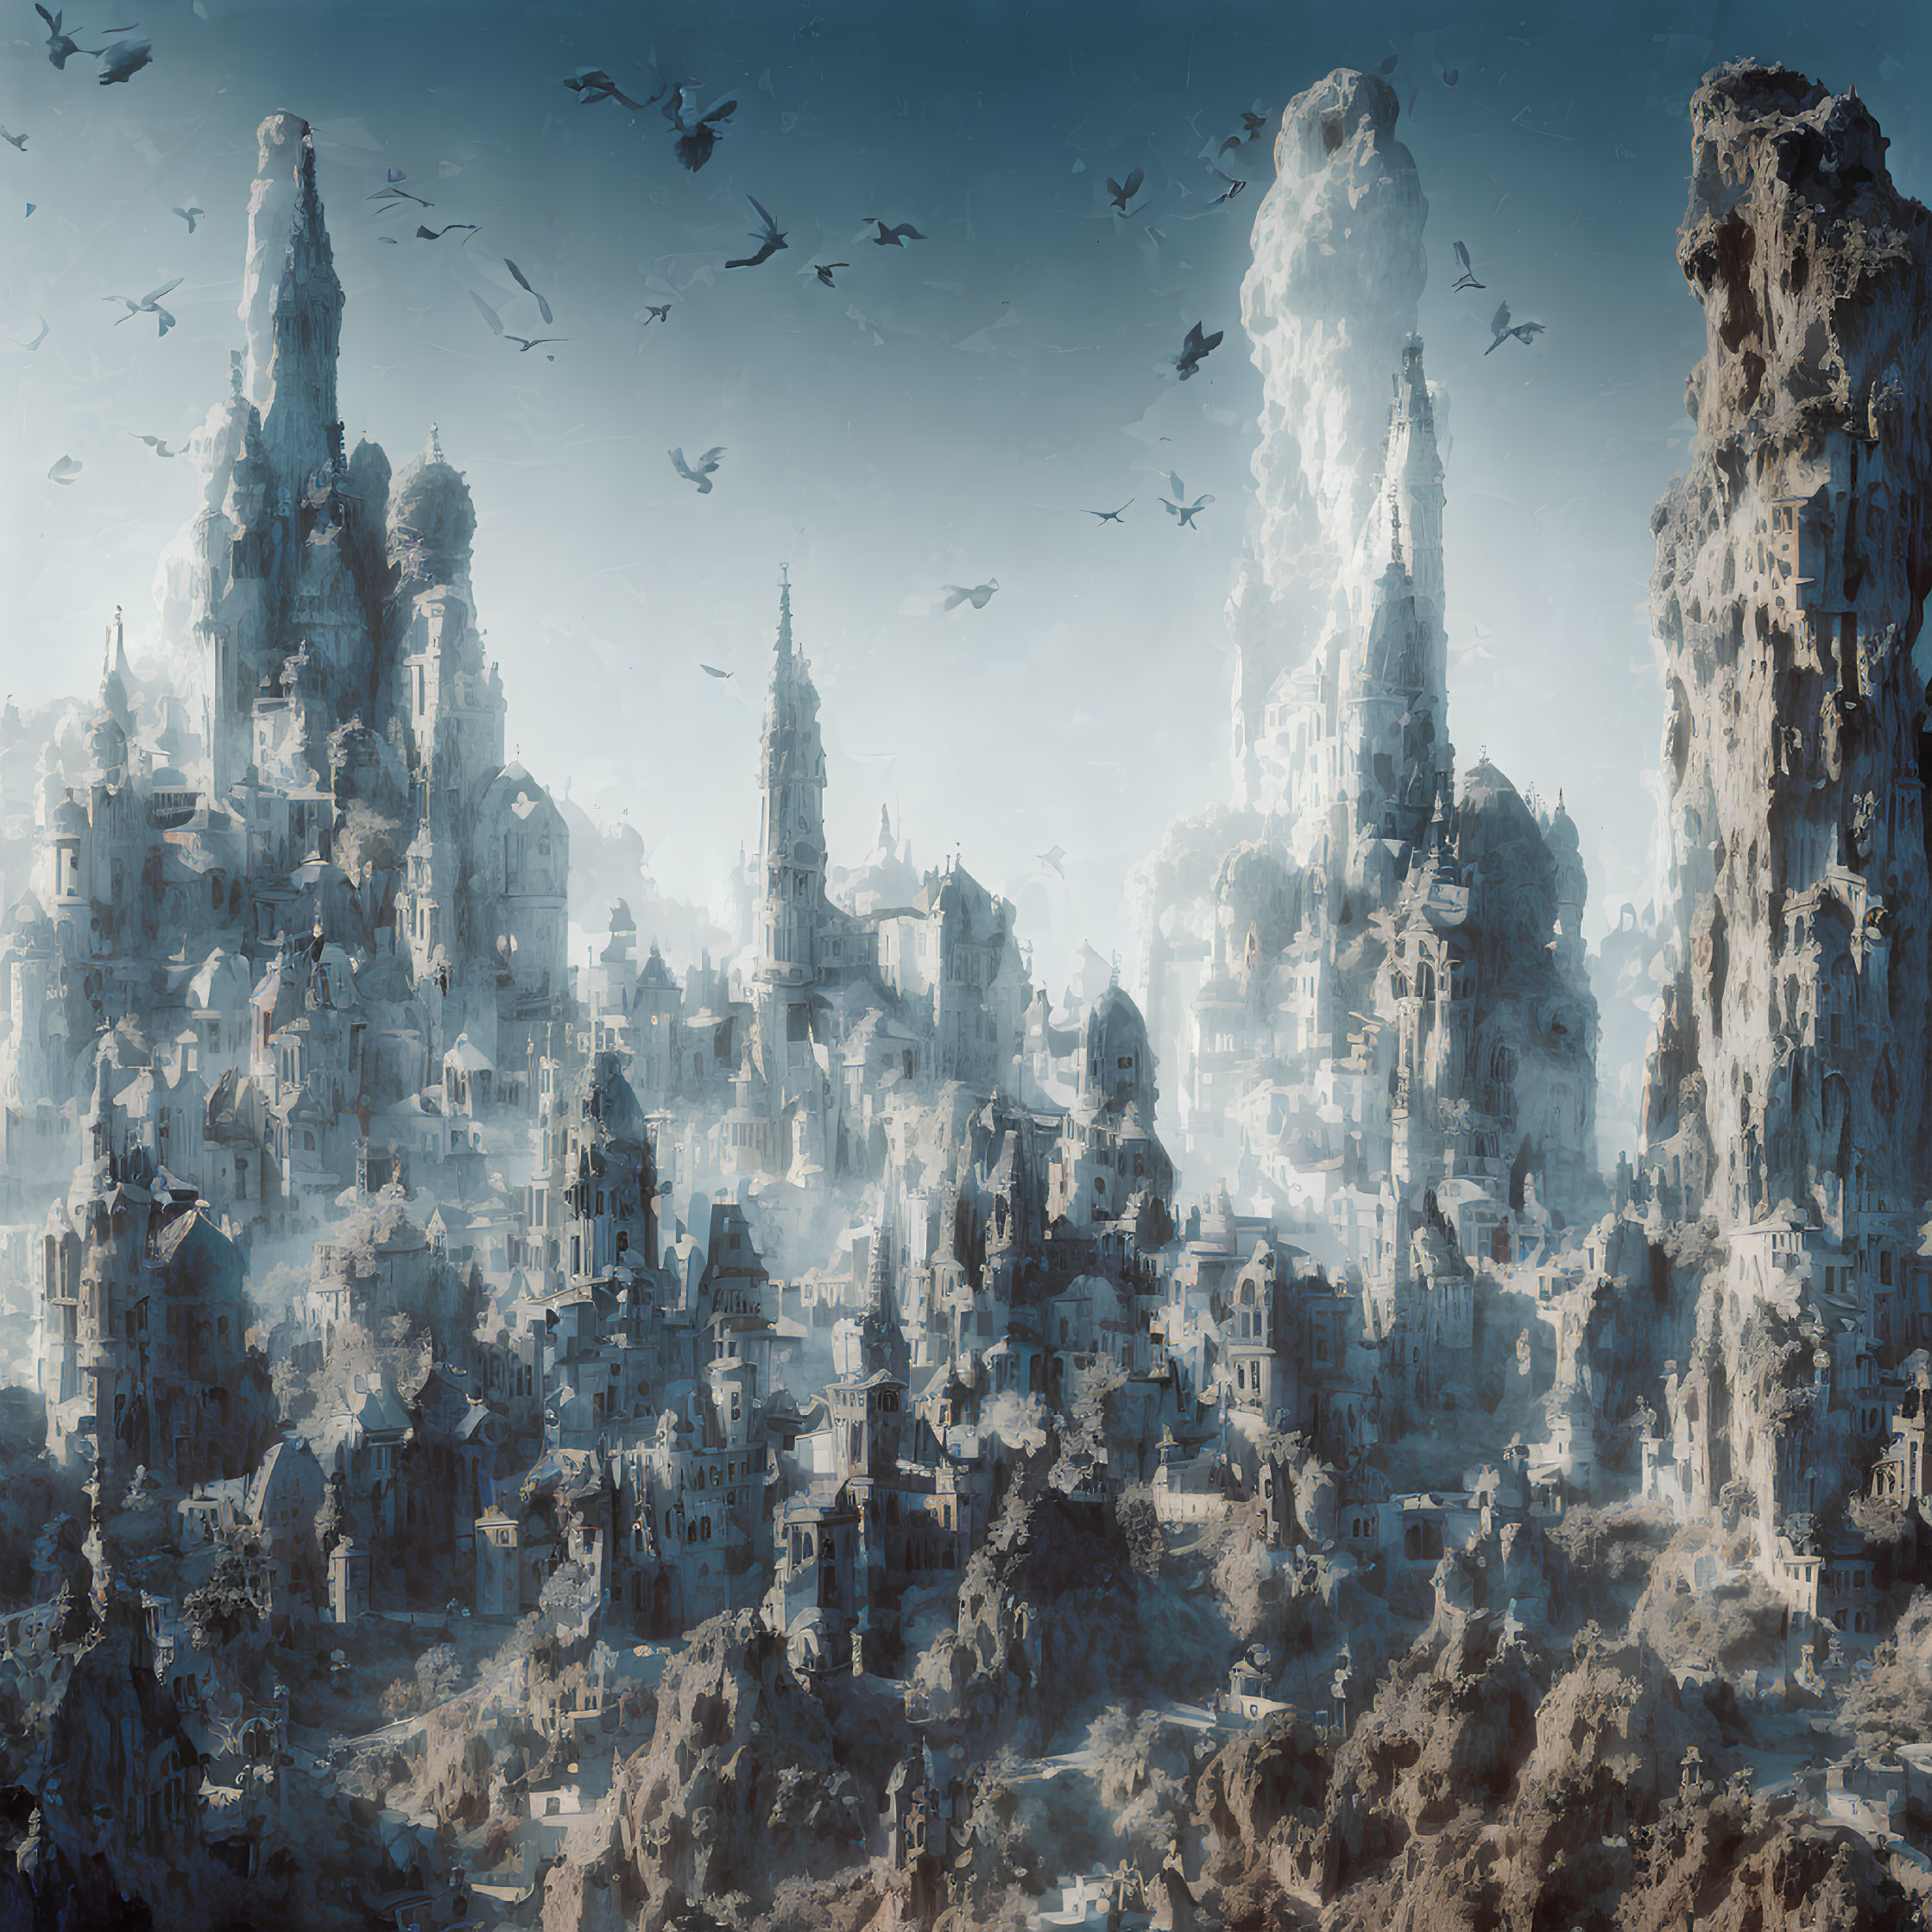 Fantasy city with towering spires and misty atmosphere